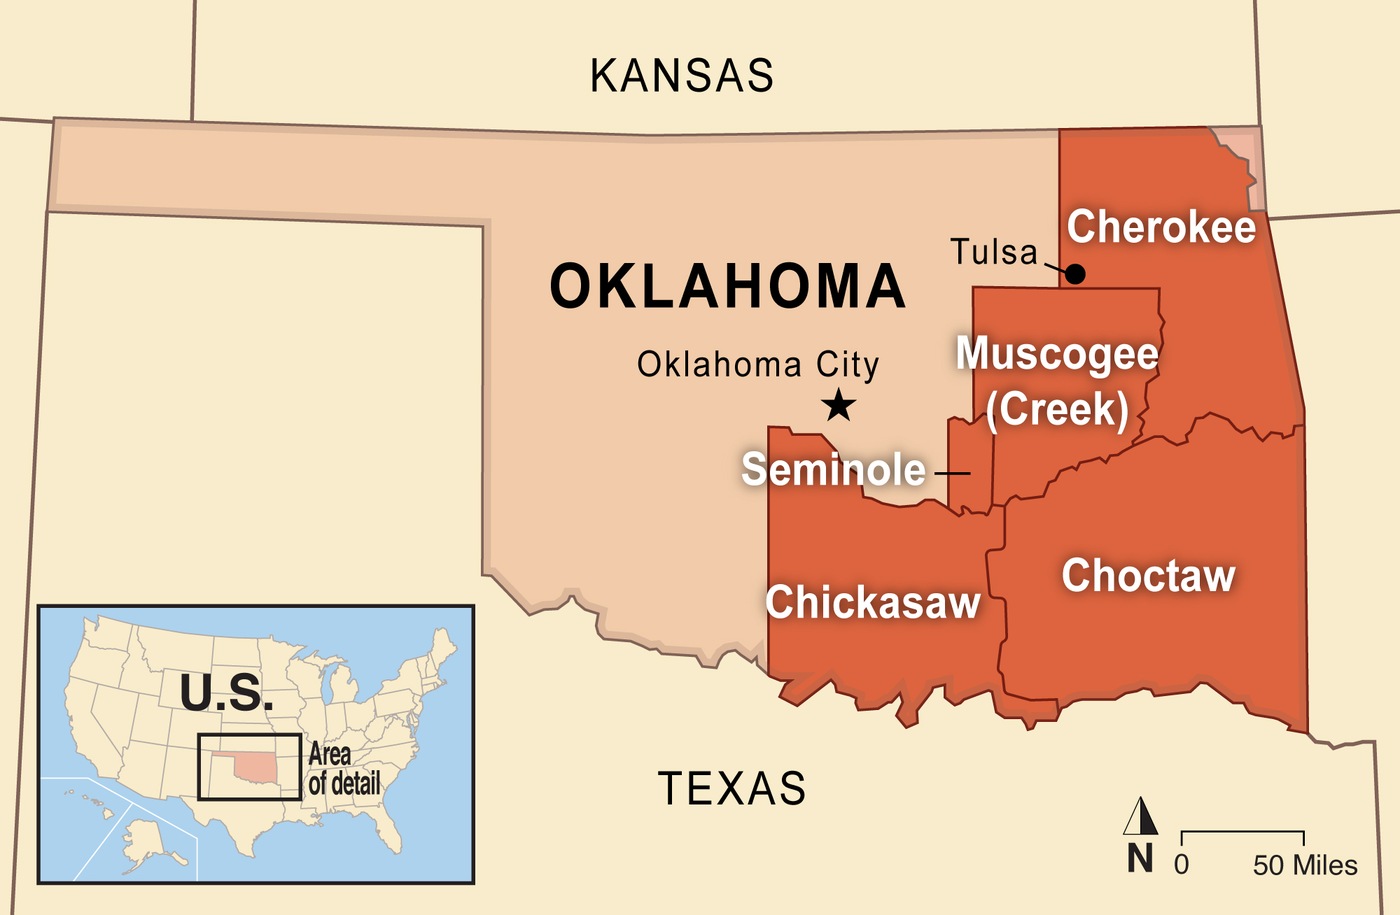 Map of Oklahoma showing areas affirmed in a 2020 Supreme Court ruling to be under jurisdiction of Native Americans.